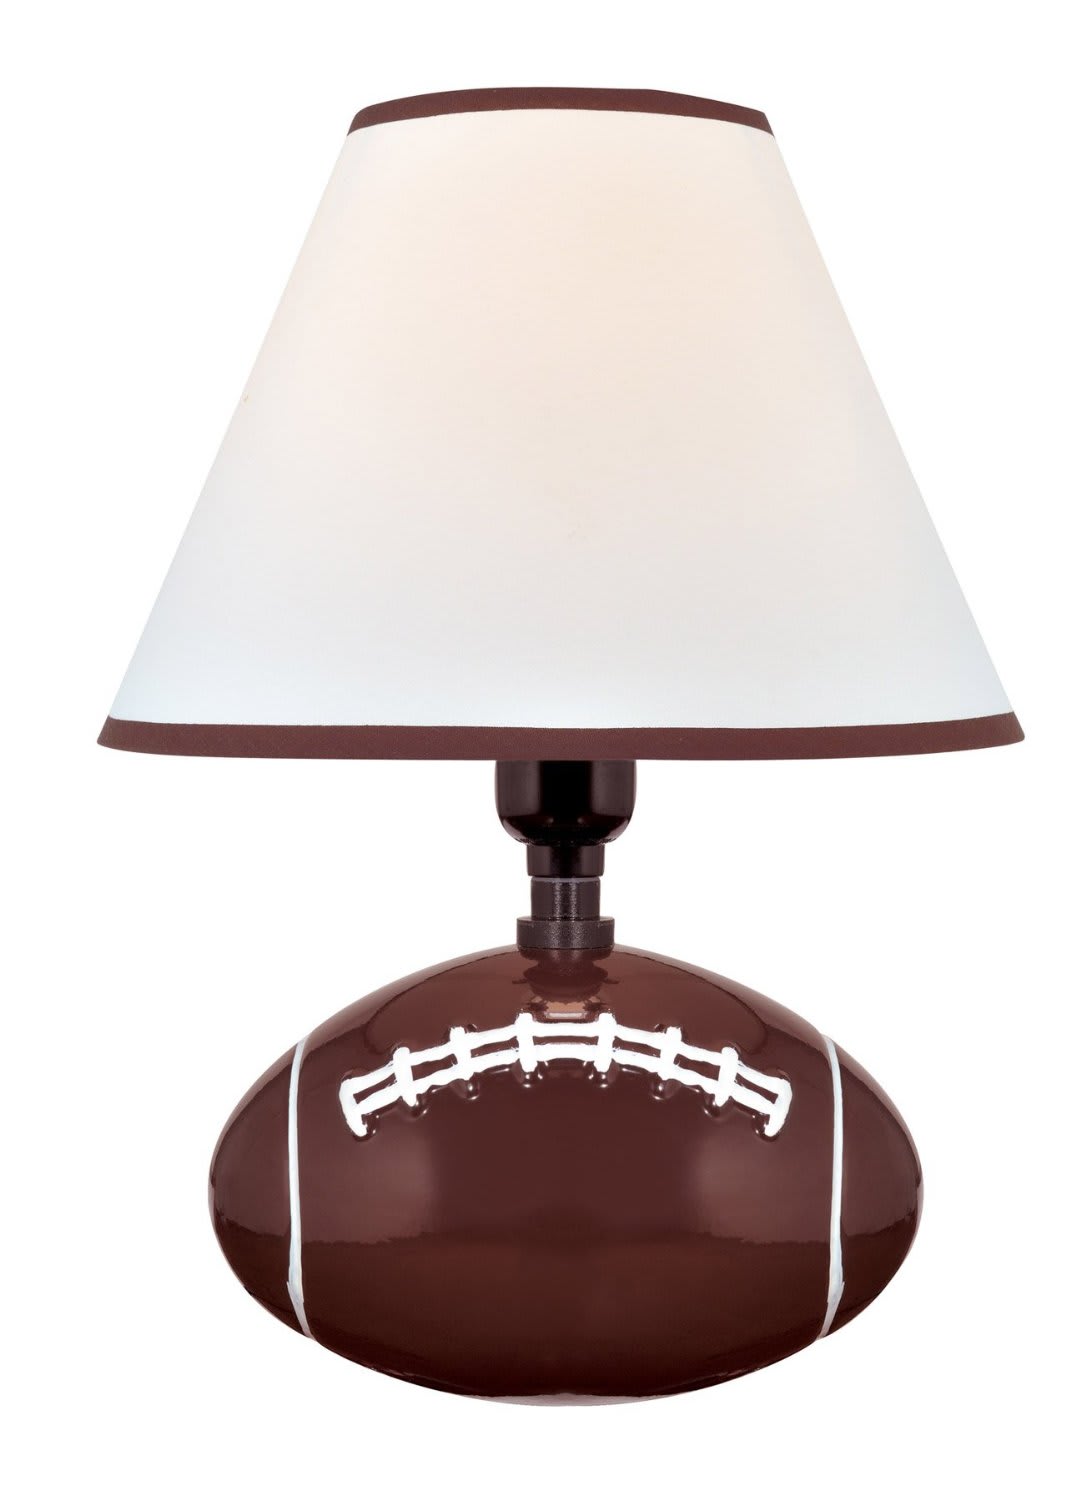 Lite Source IK-6100 Table Lamp with White Fabric Shades Brown Finish 9 x 9 x 11.5